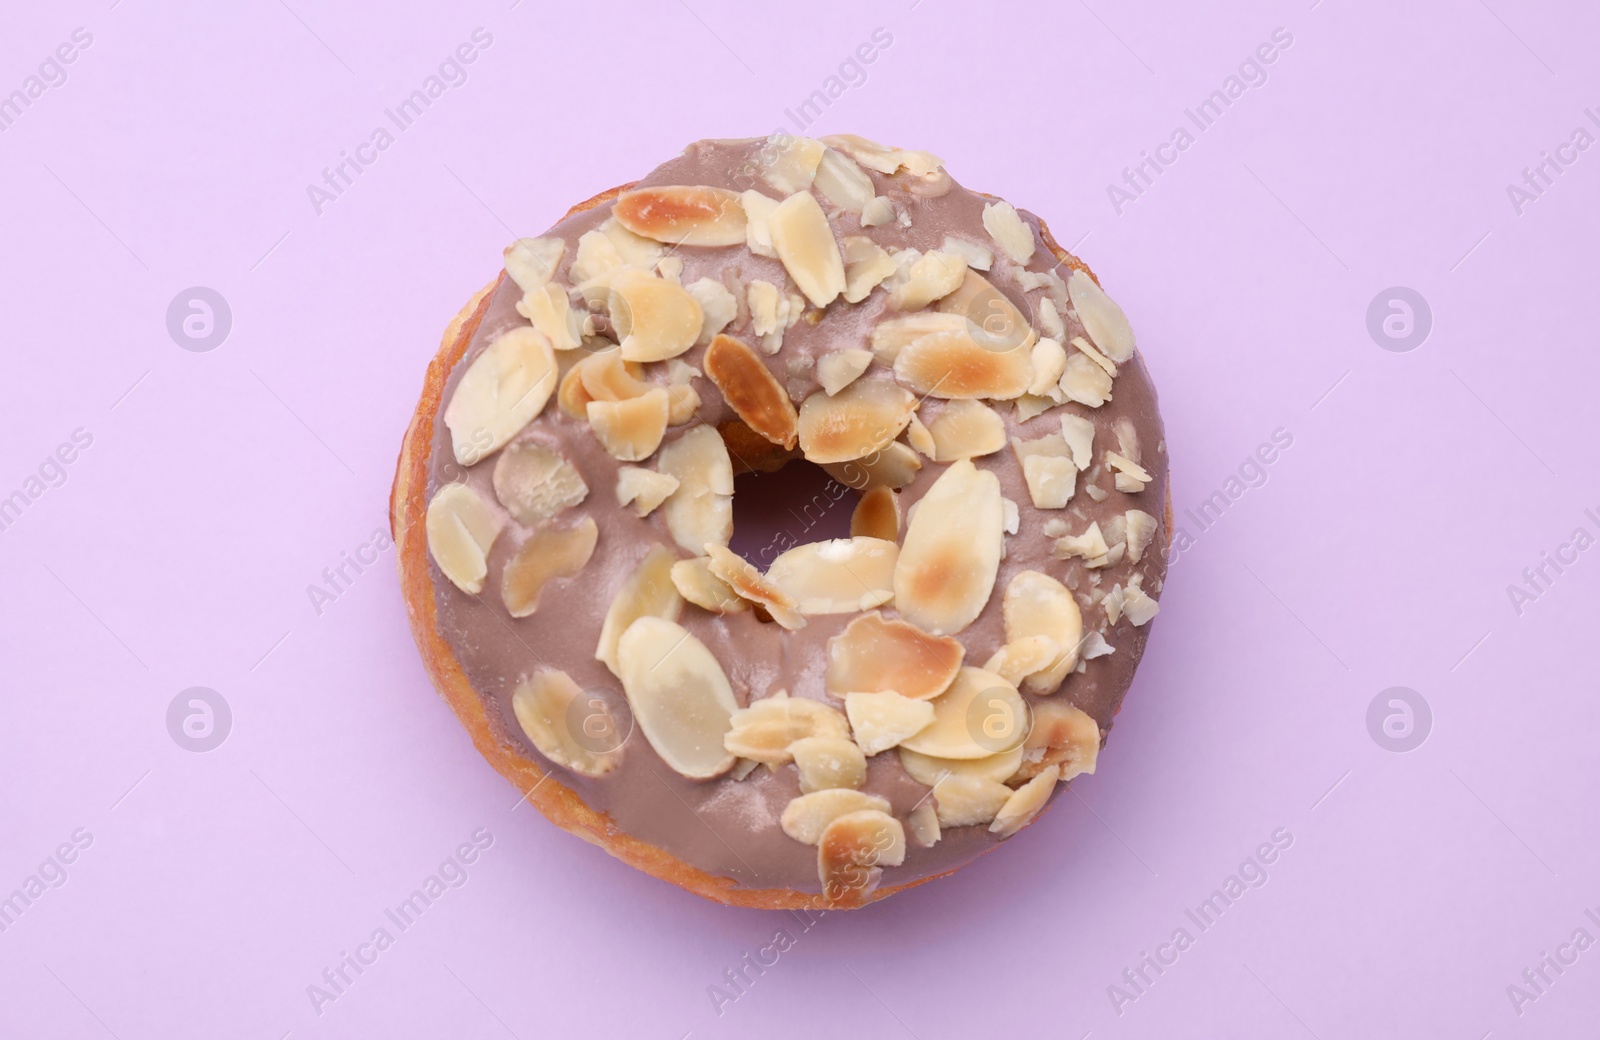 Photo of Tasty glazed donut decorated with nuts on purple background, top view